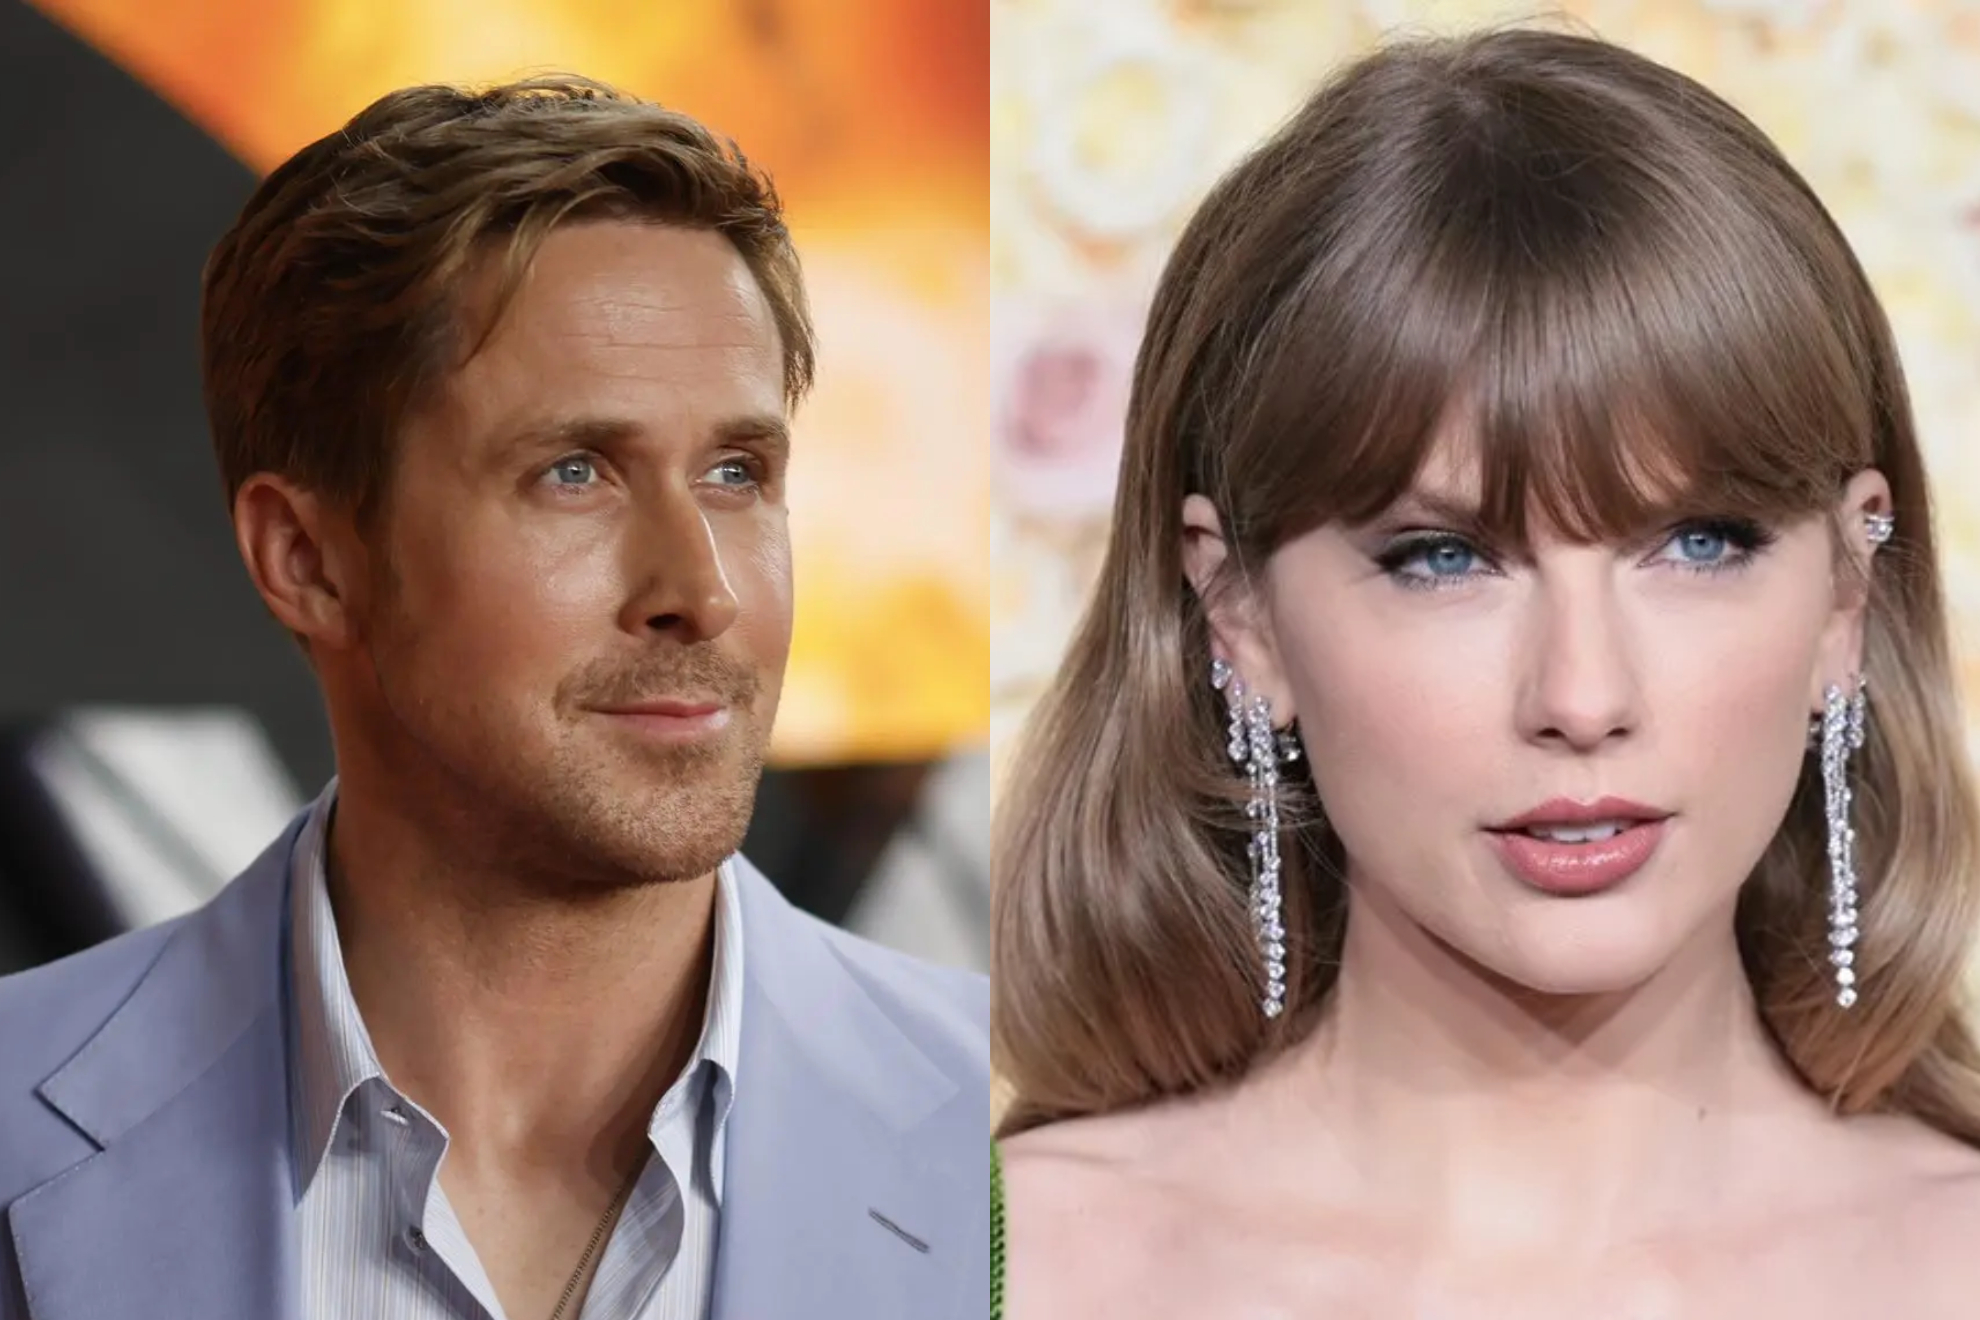 Ryan Gosling and Taylor Swift.